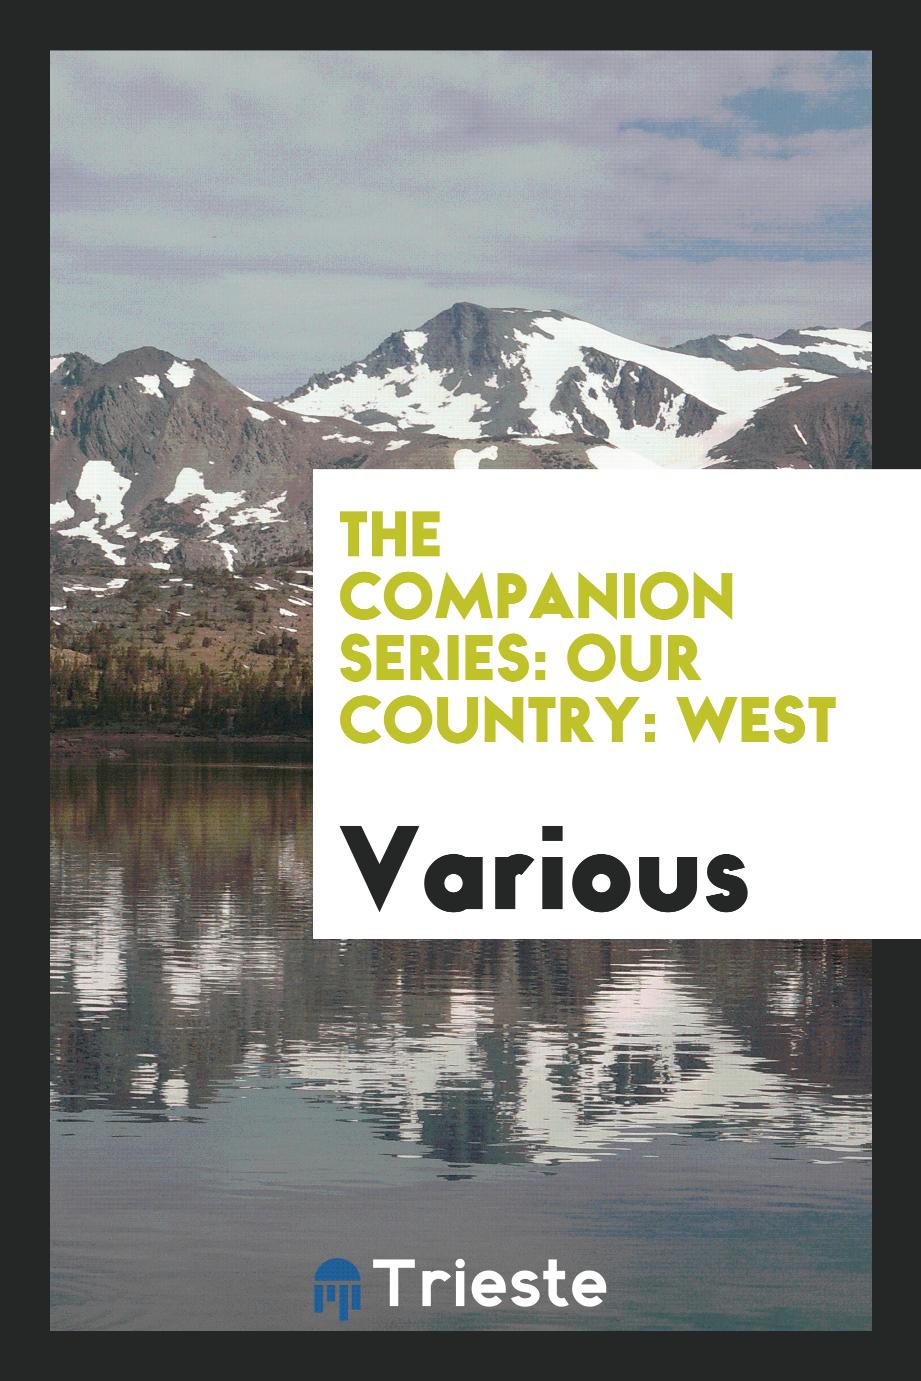 The Companion Series: Our Country: West